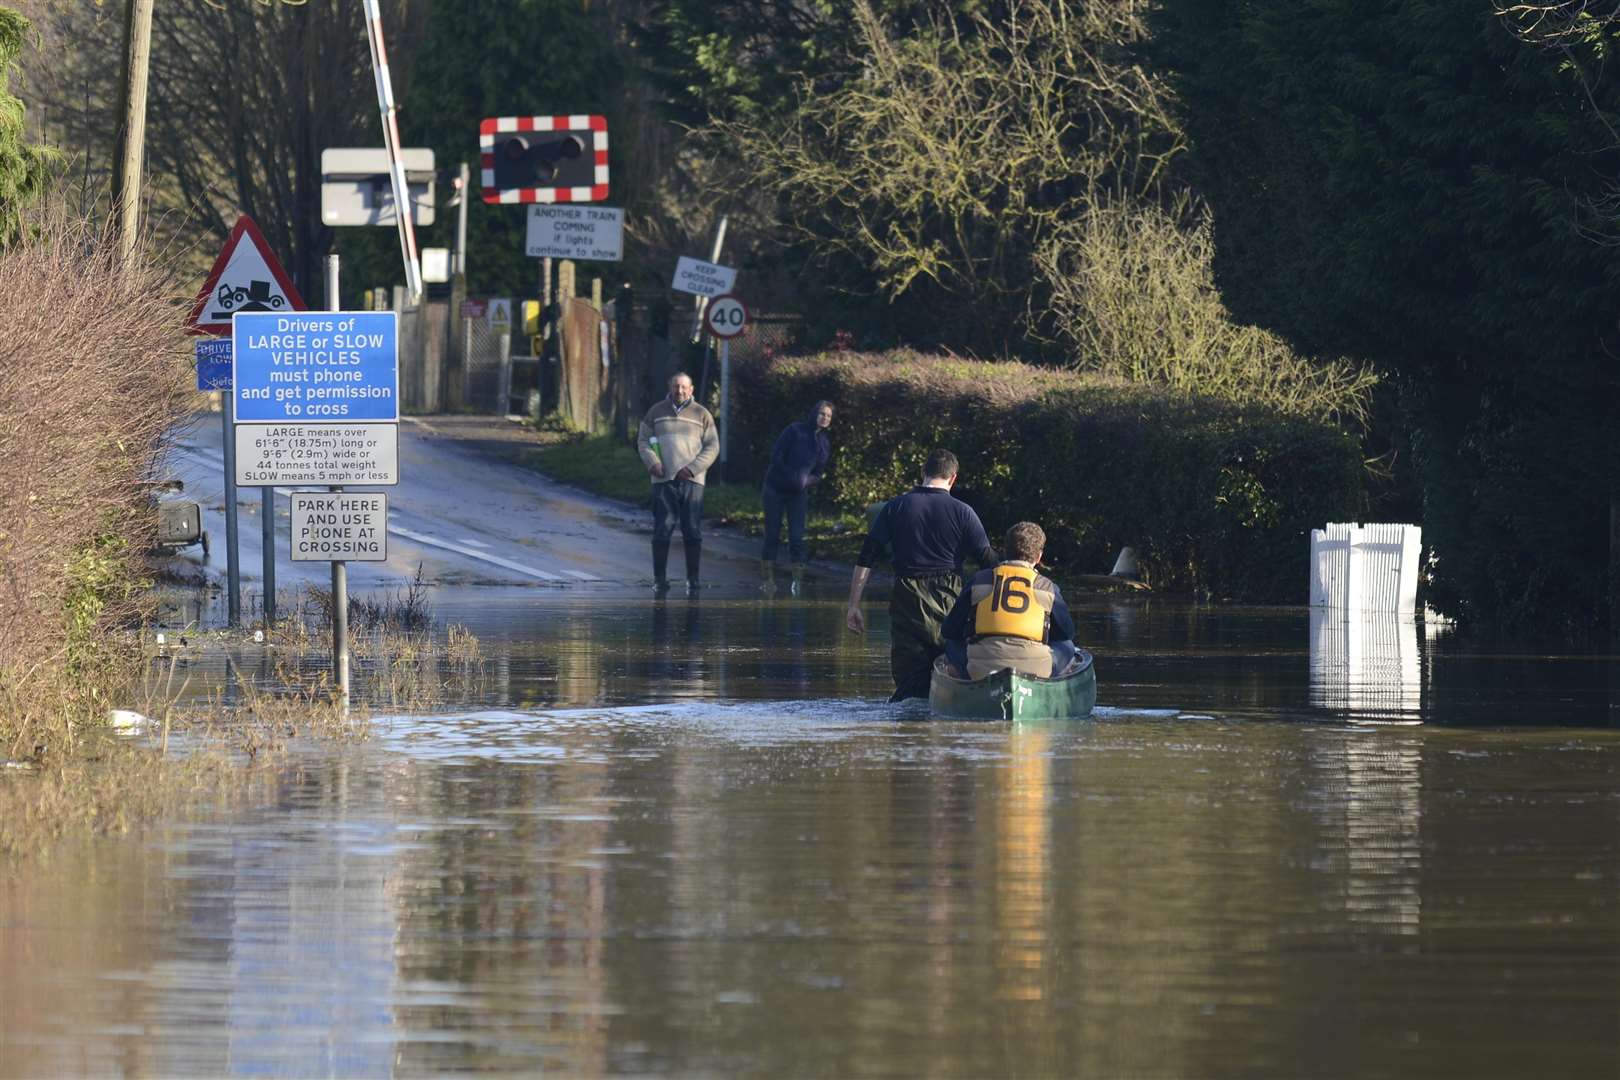 Yalding was hit by severe flooding in 2013